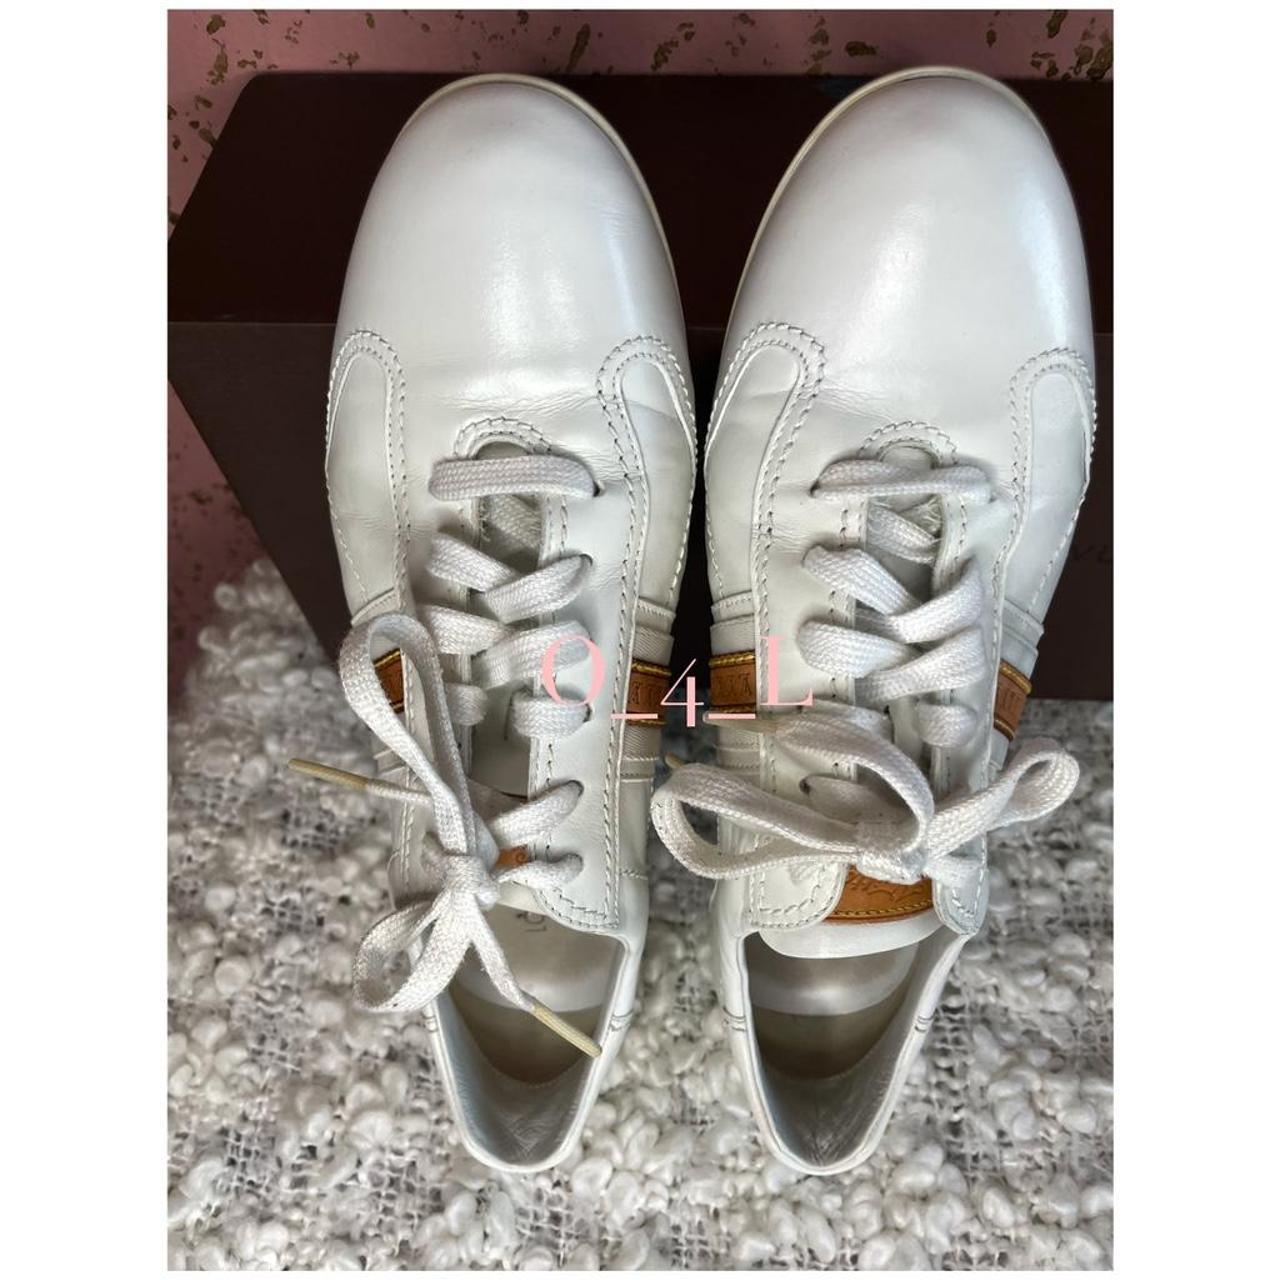 Louis Vuitton #sneakers  Nike free shoes, Sneakers, Shoes outlet